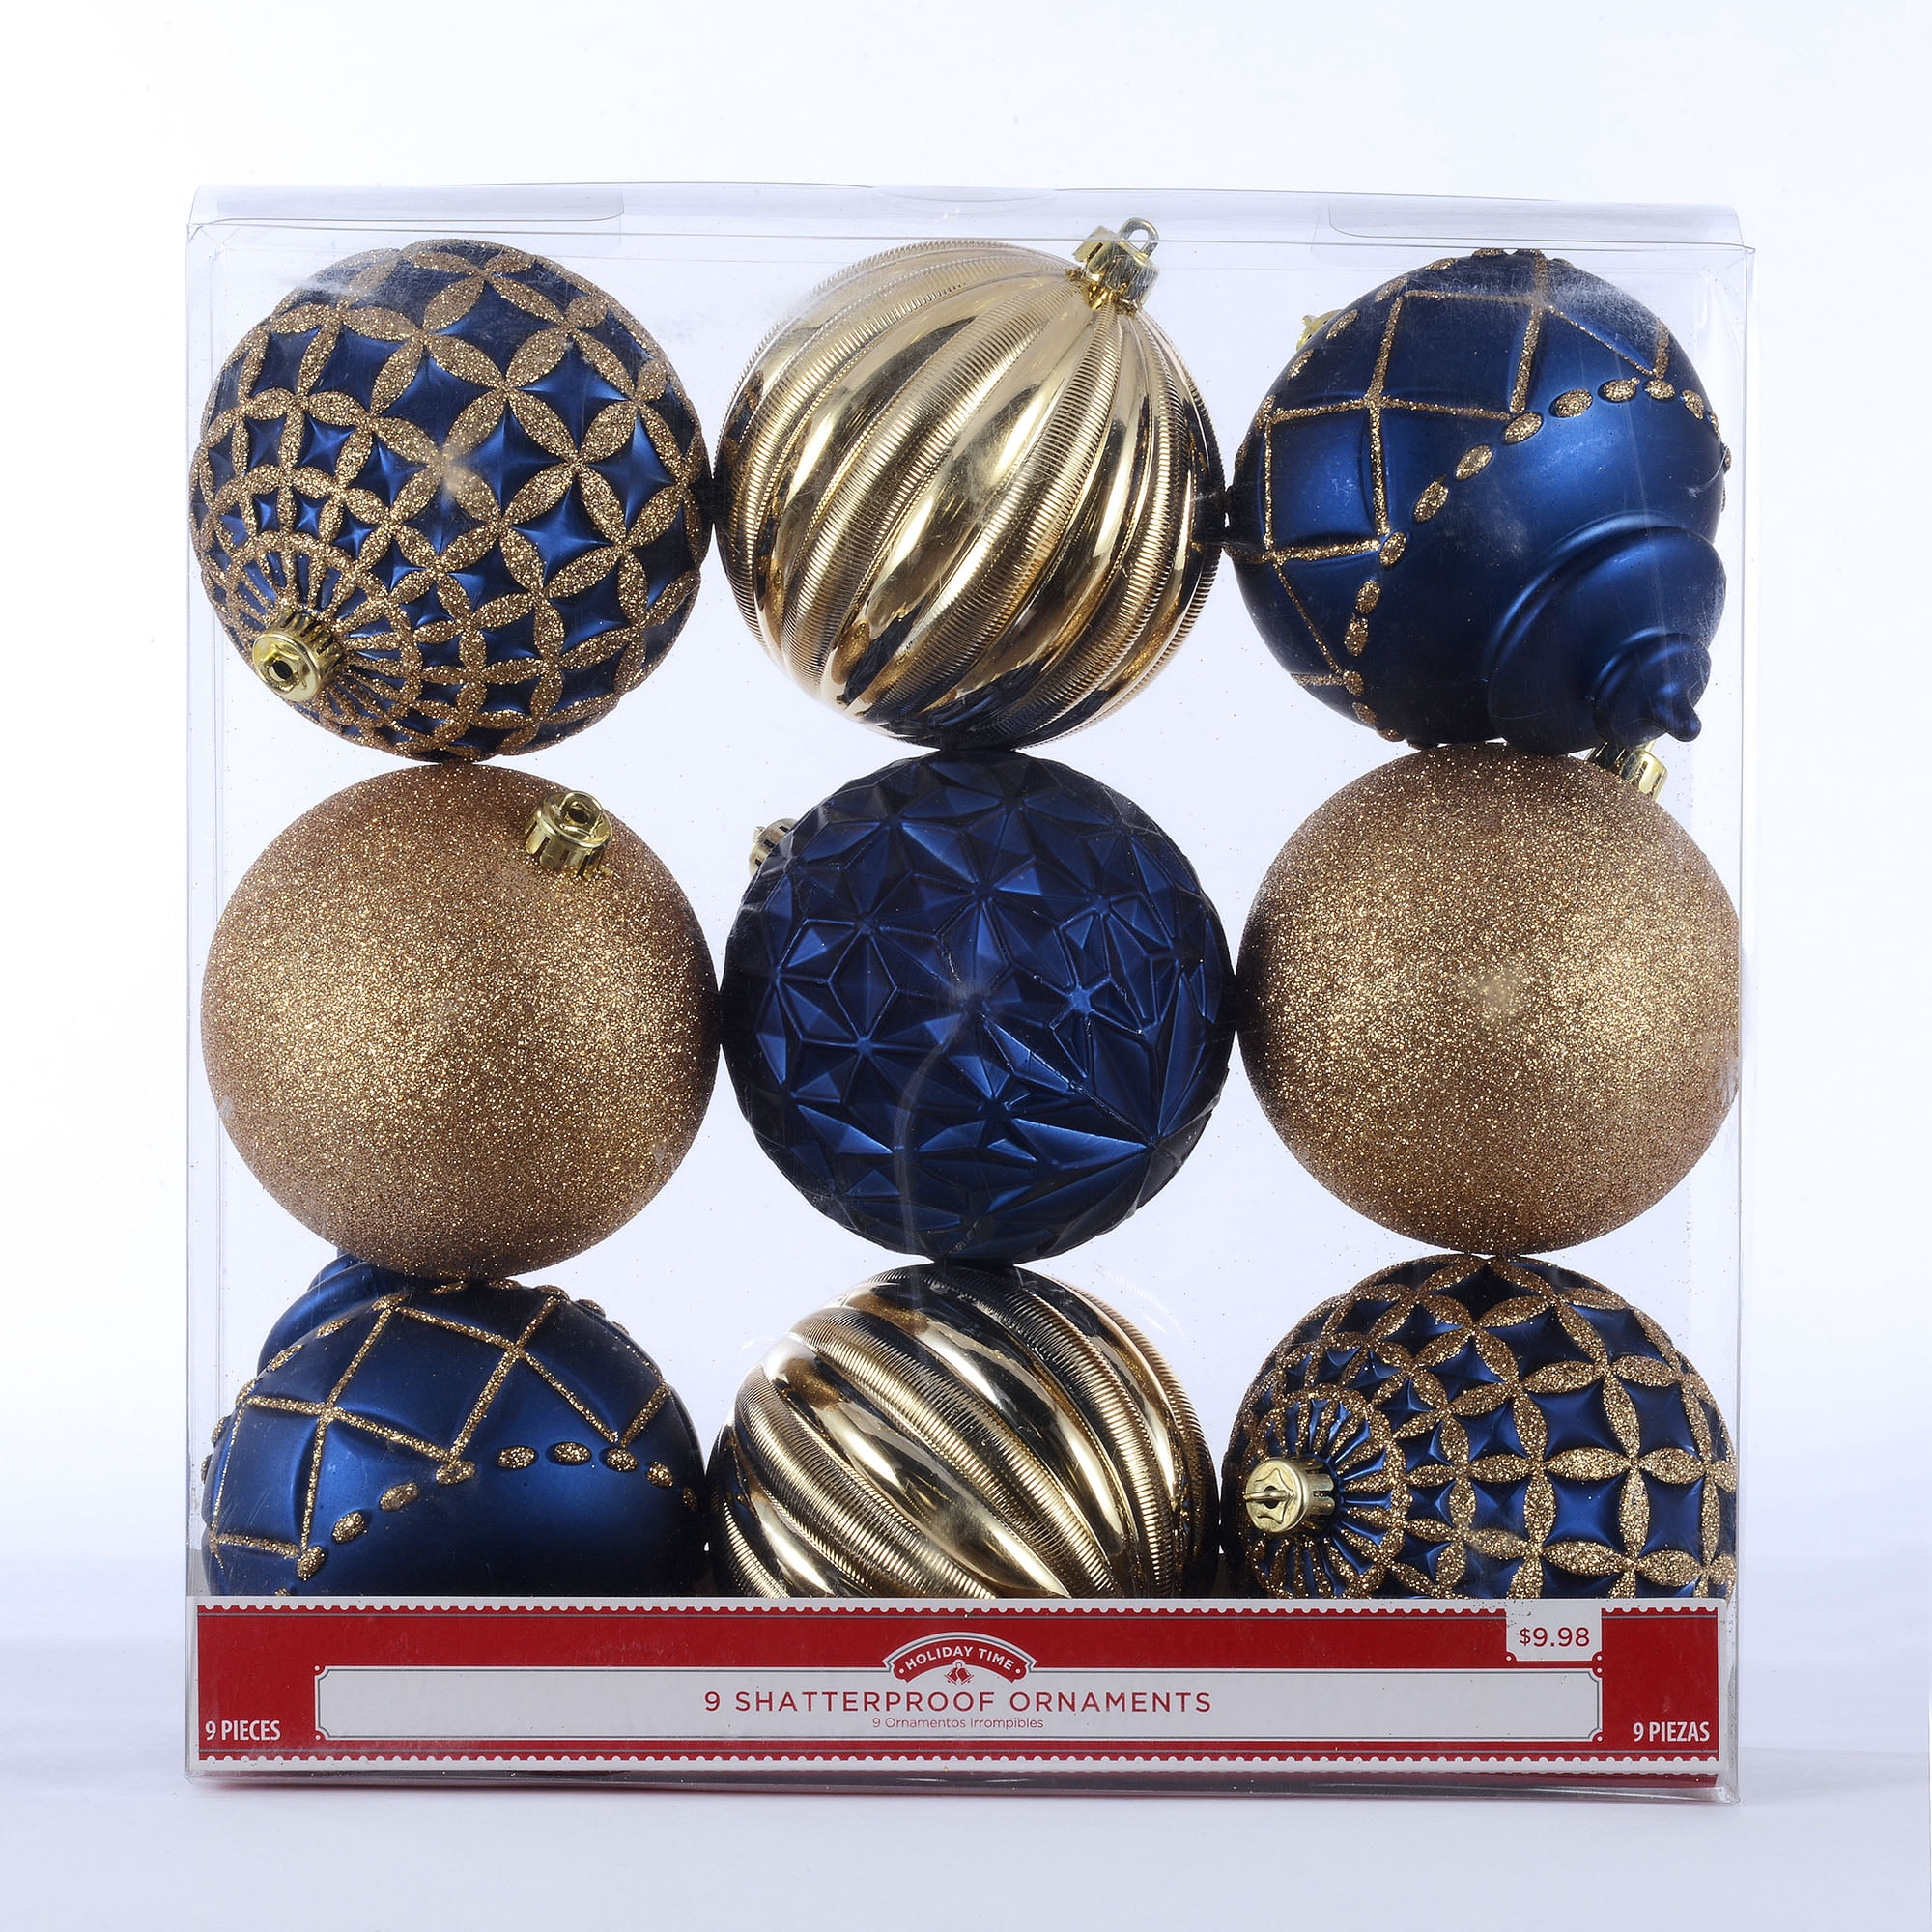 Holiday Time Shatterproof Ornaments. walmart photo center ornaments. 